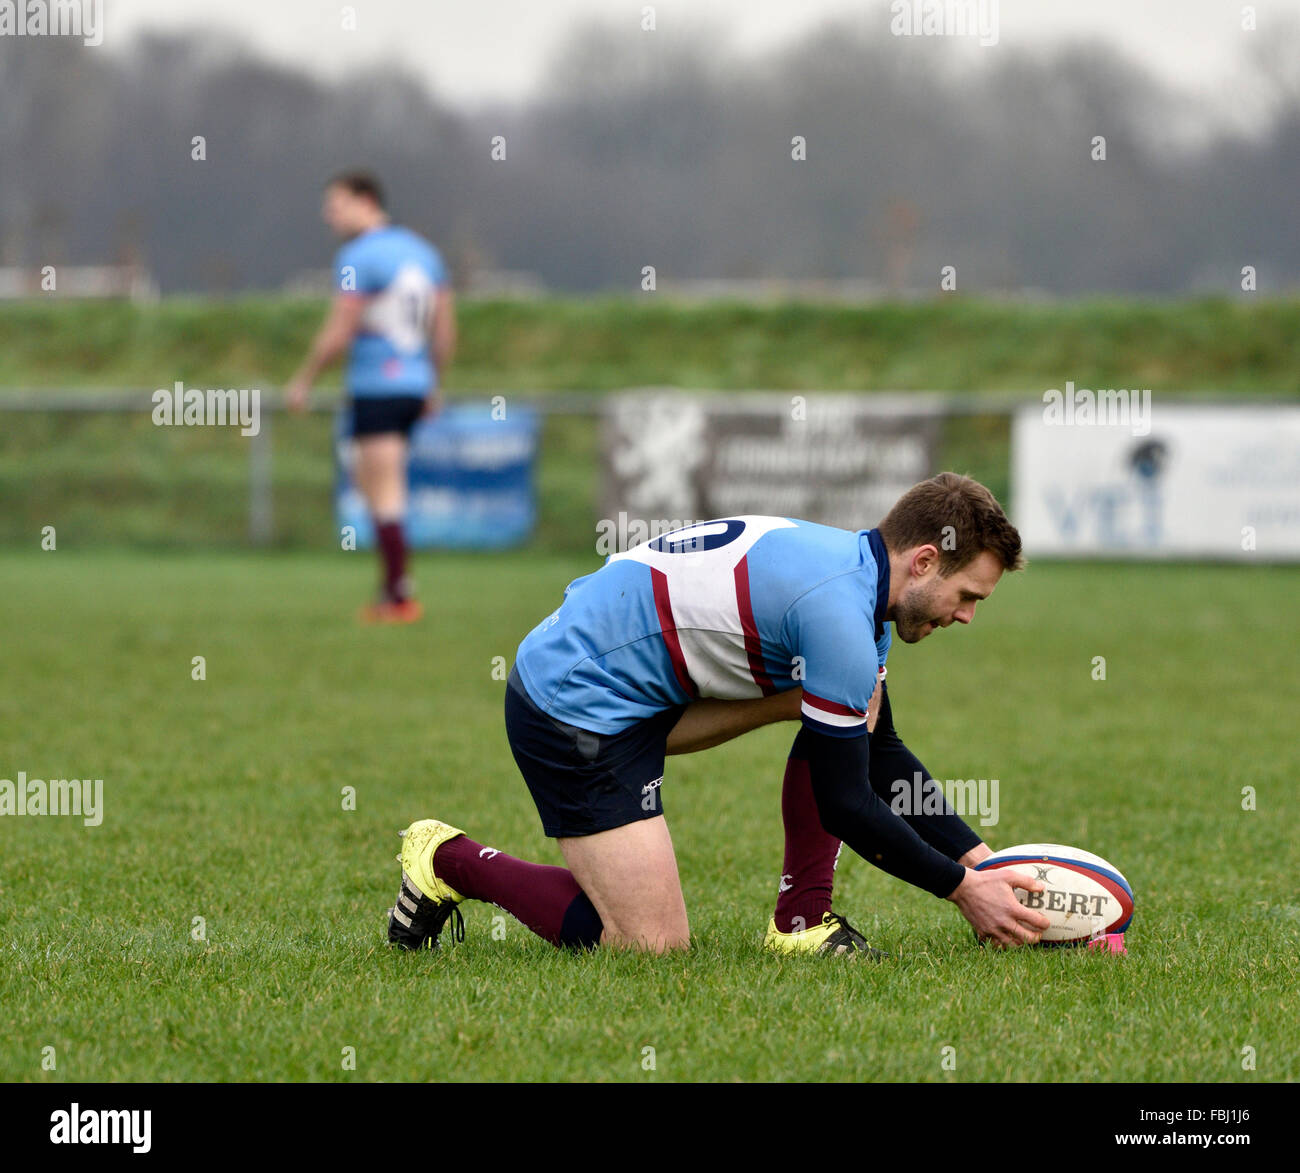 The Wilmslow fly-half paces the ball carefully before attempting a conversion in a rugby match against Broughton Park Stock Photo